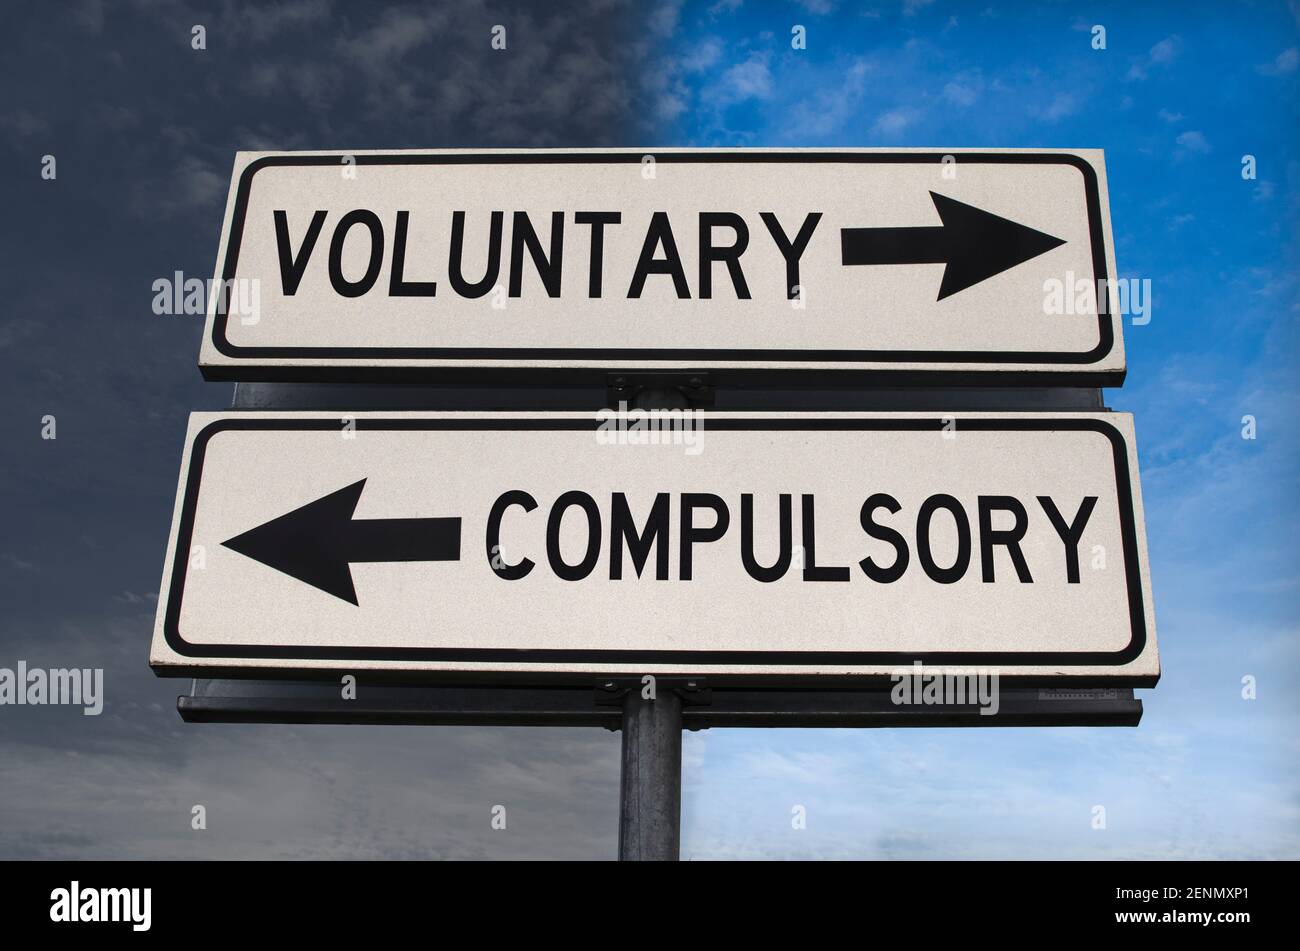 Voluntary versus compulsory road sign with two arrows on blue and grey sky background. White two street sign with arrows on metal pole. Two way road s Stock Photo